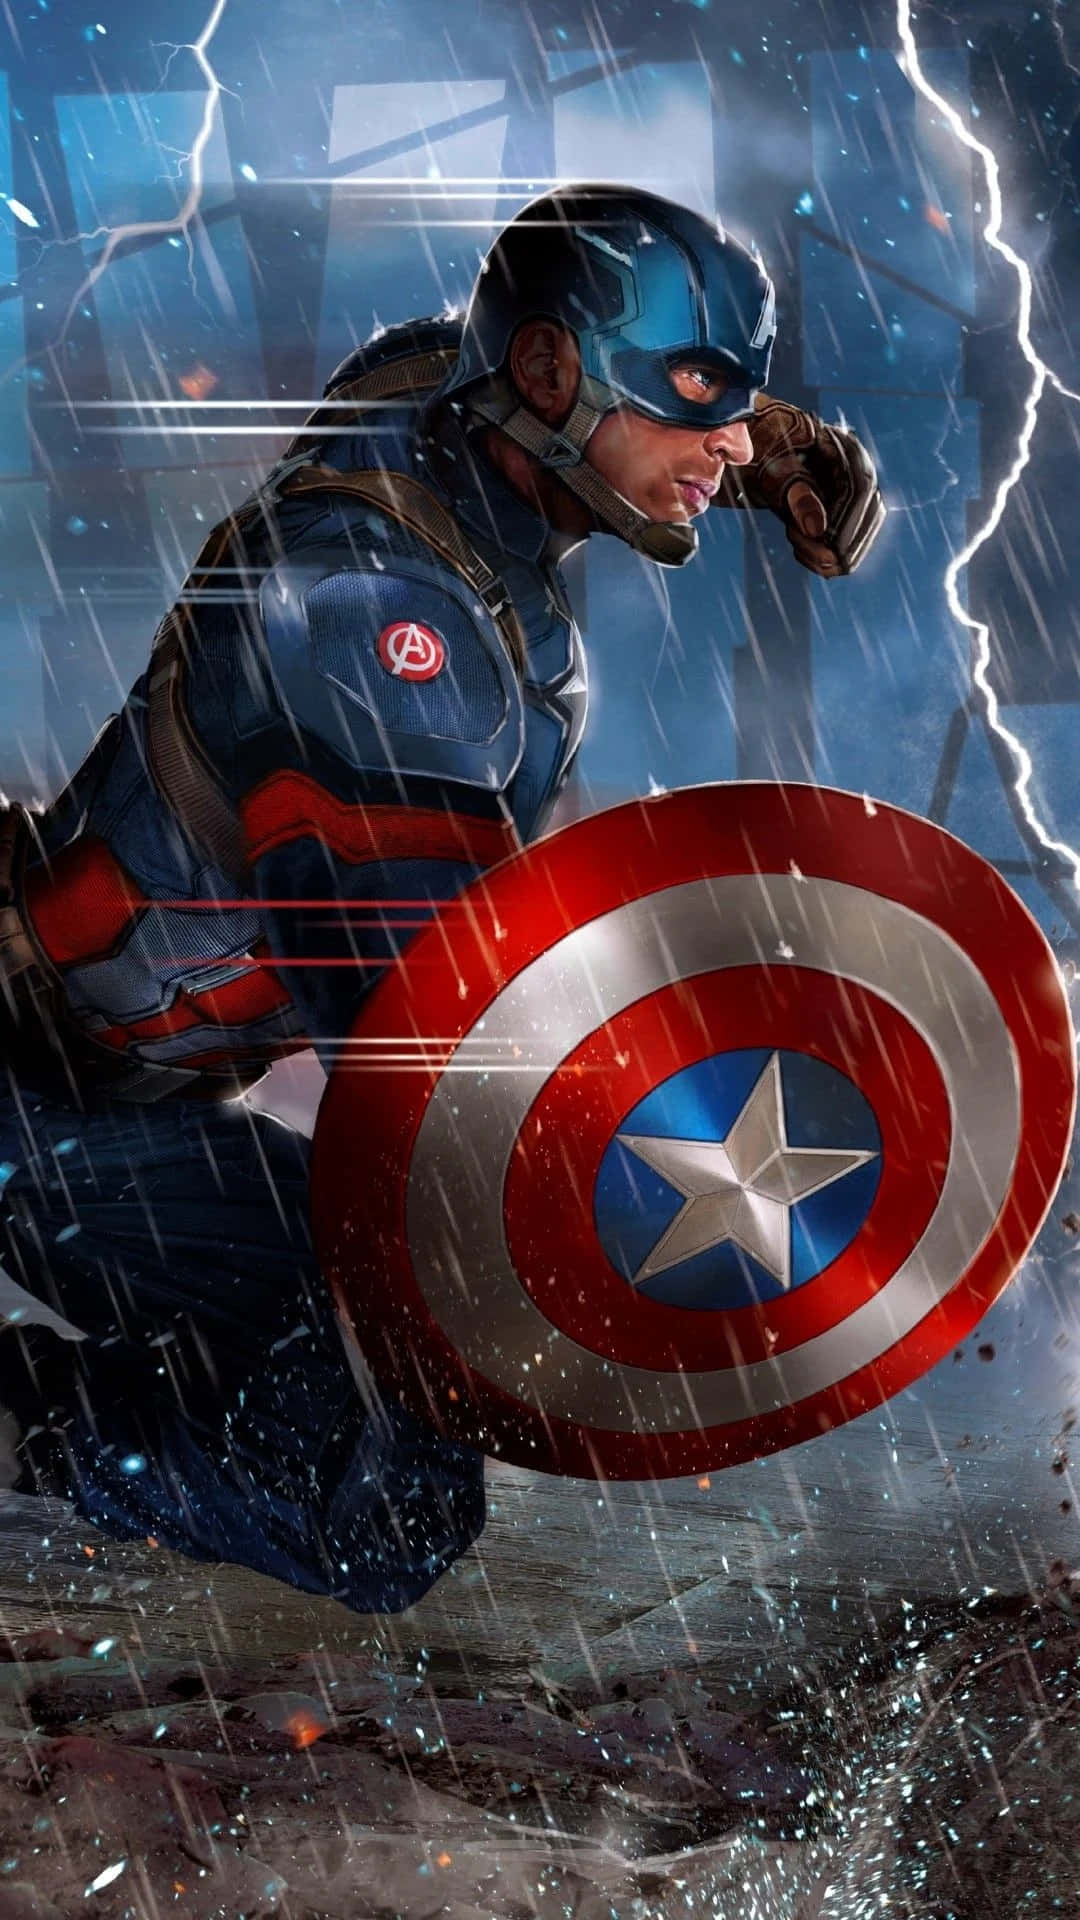 Protecting the world with an Android-inspired Captain America